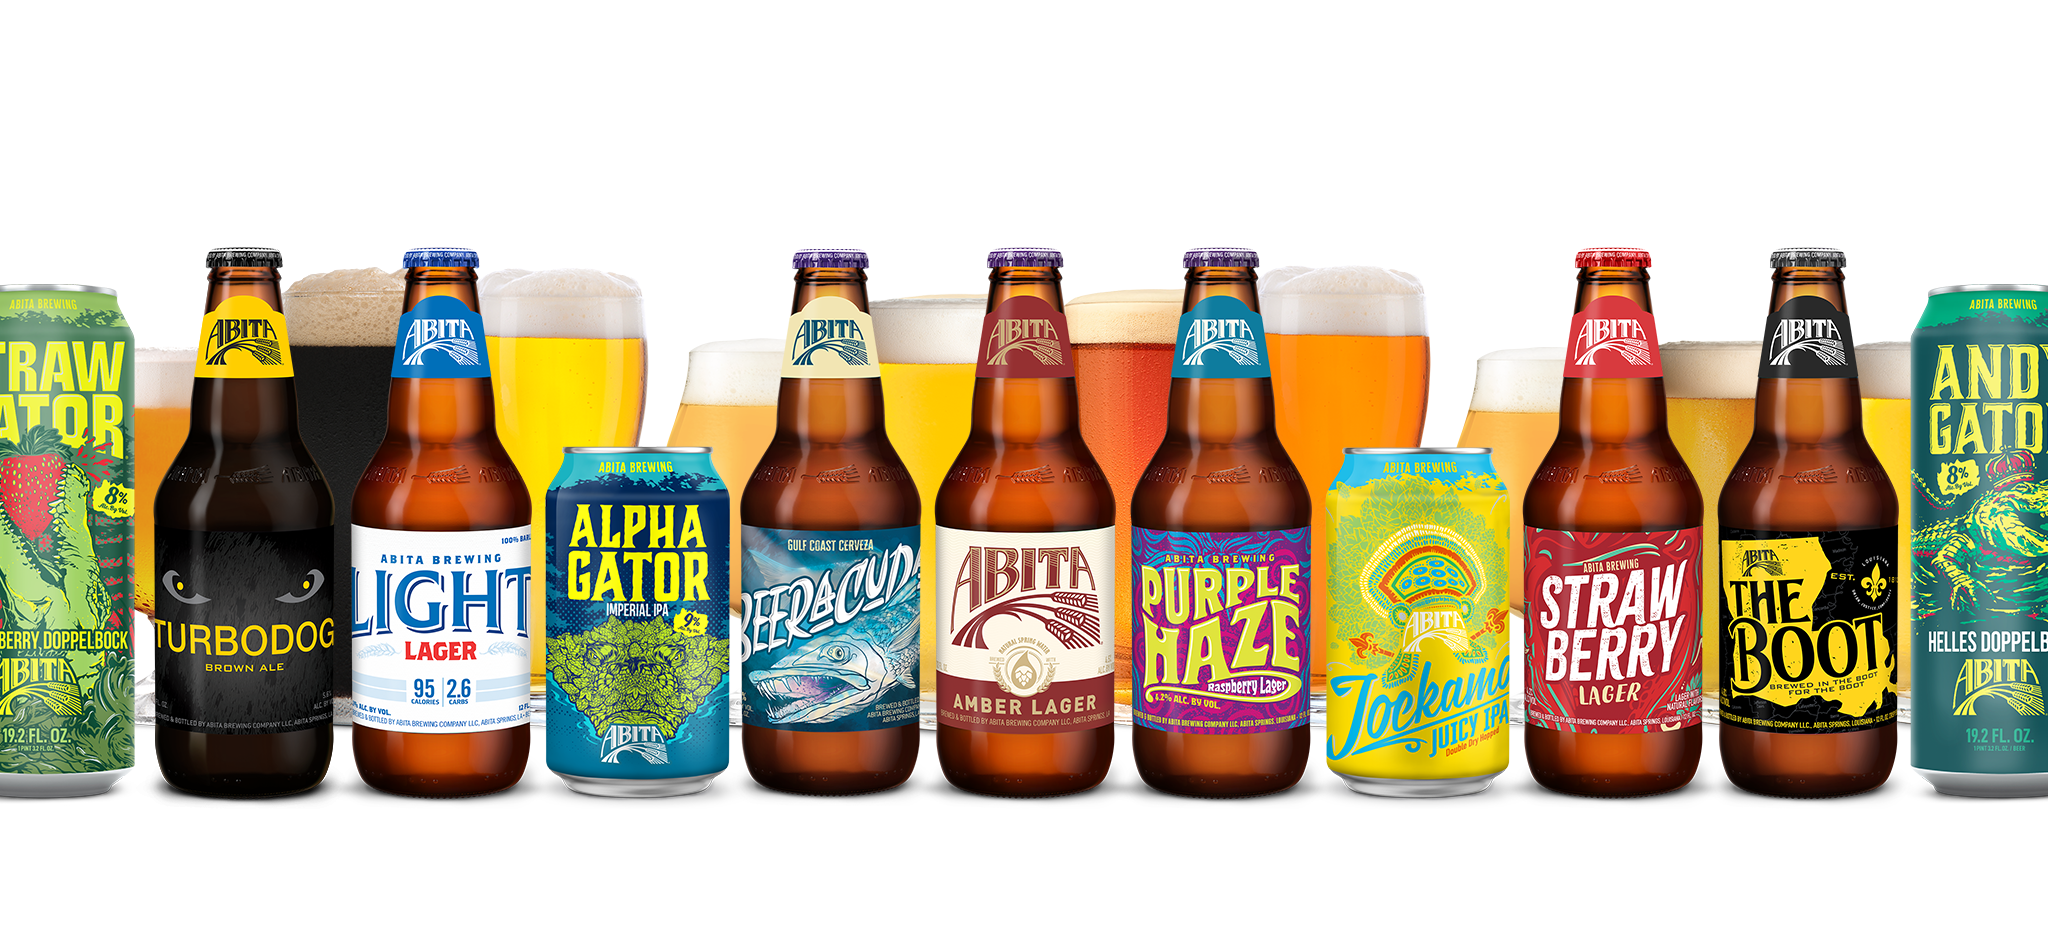 multiple beer brands from abita brewing company lined up with pint glasses behind each beer